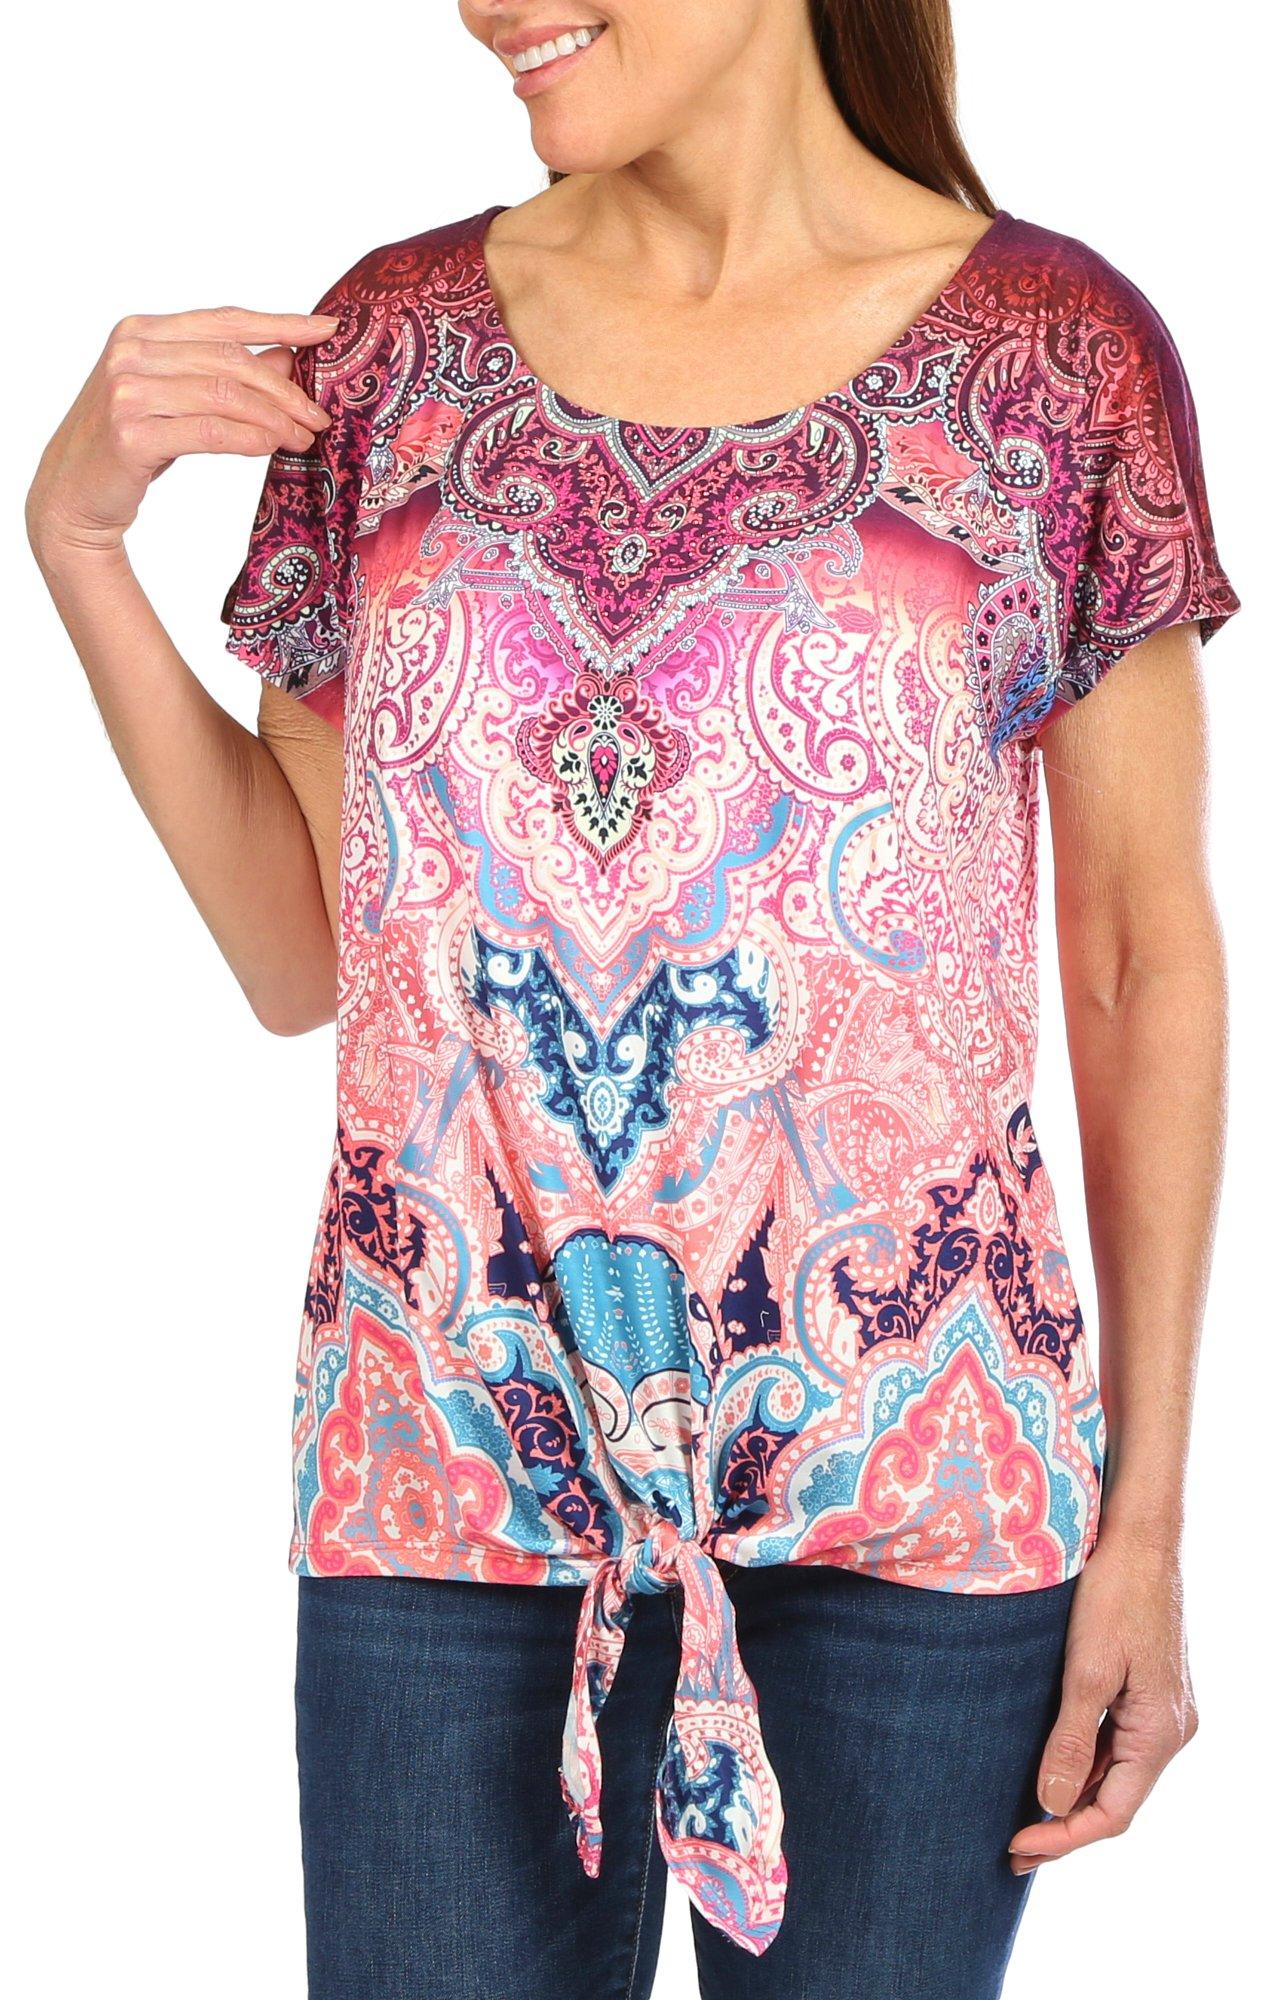 One World Womens Abstract Print Tie Front Short Sleeve Top